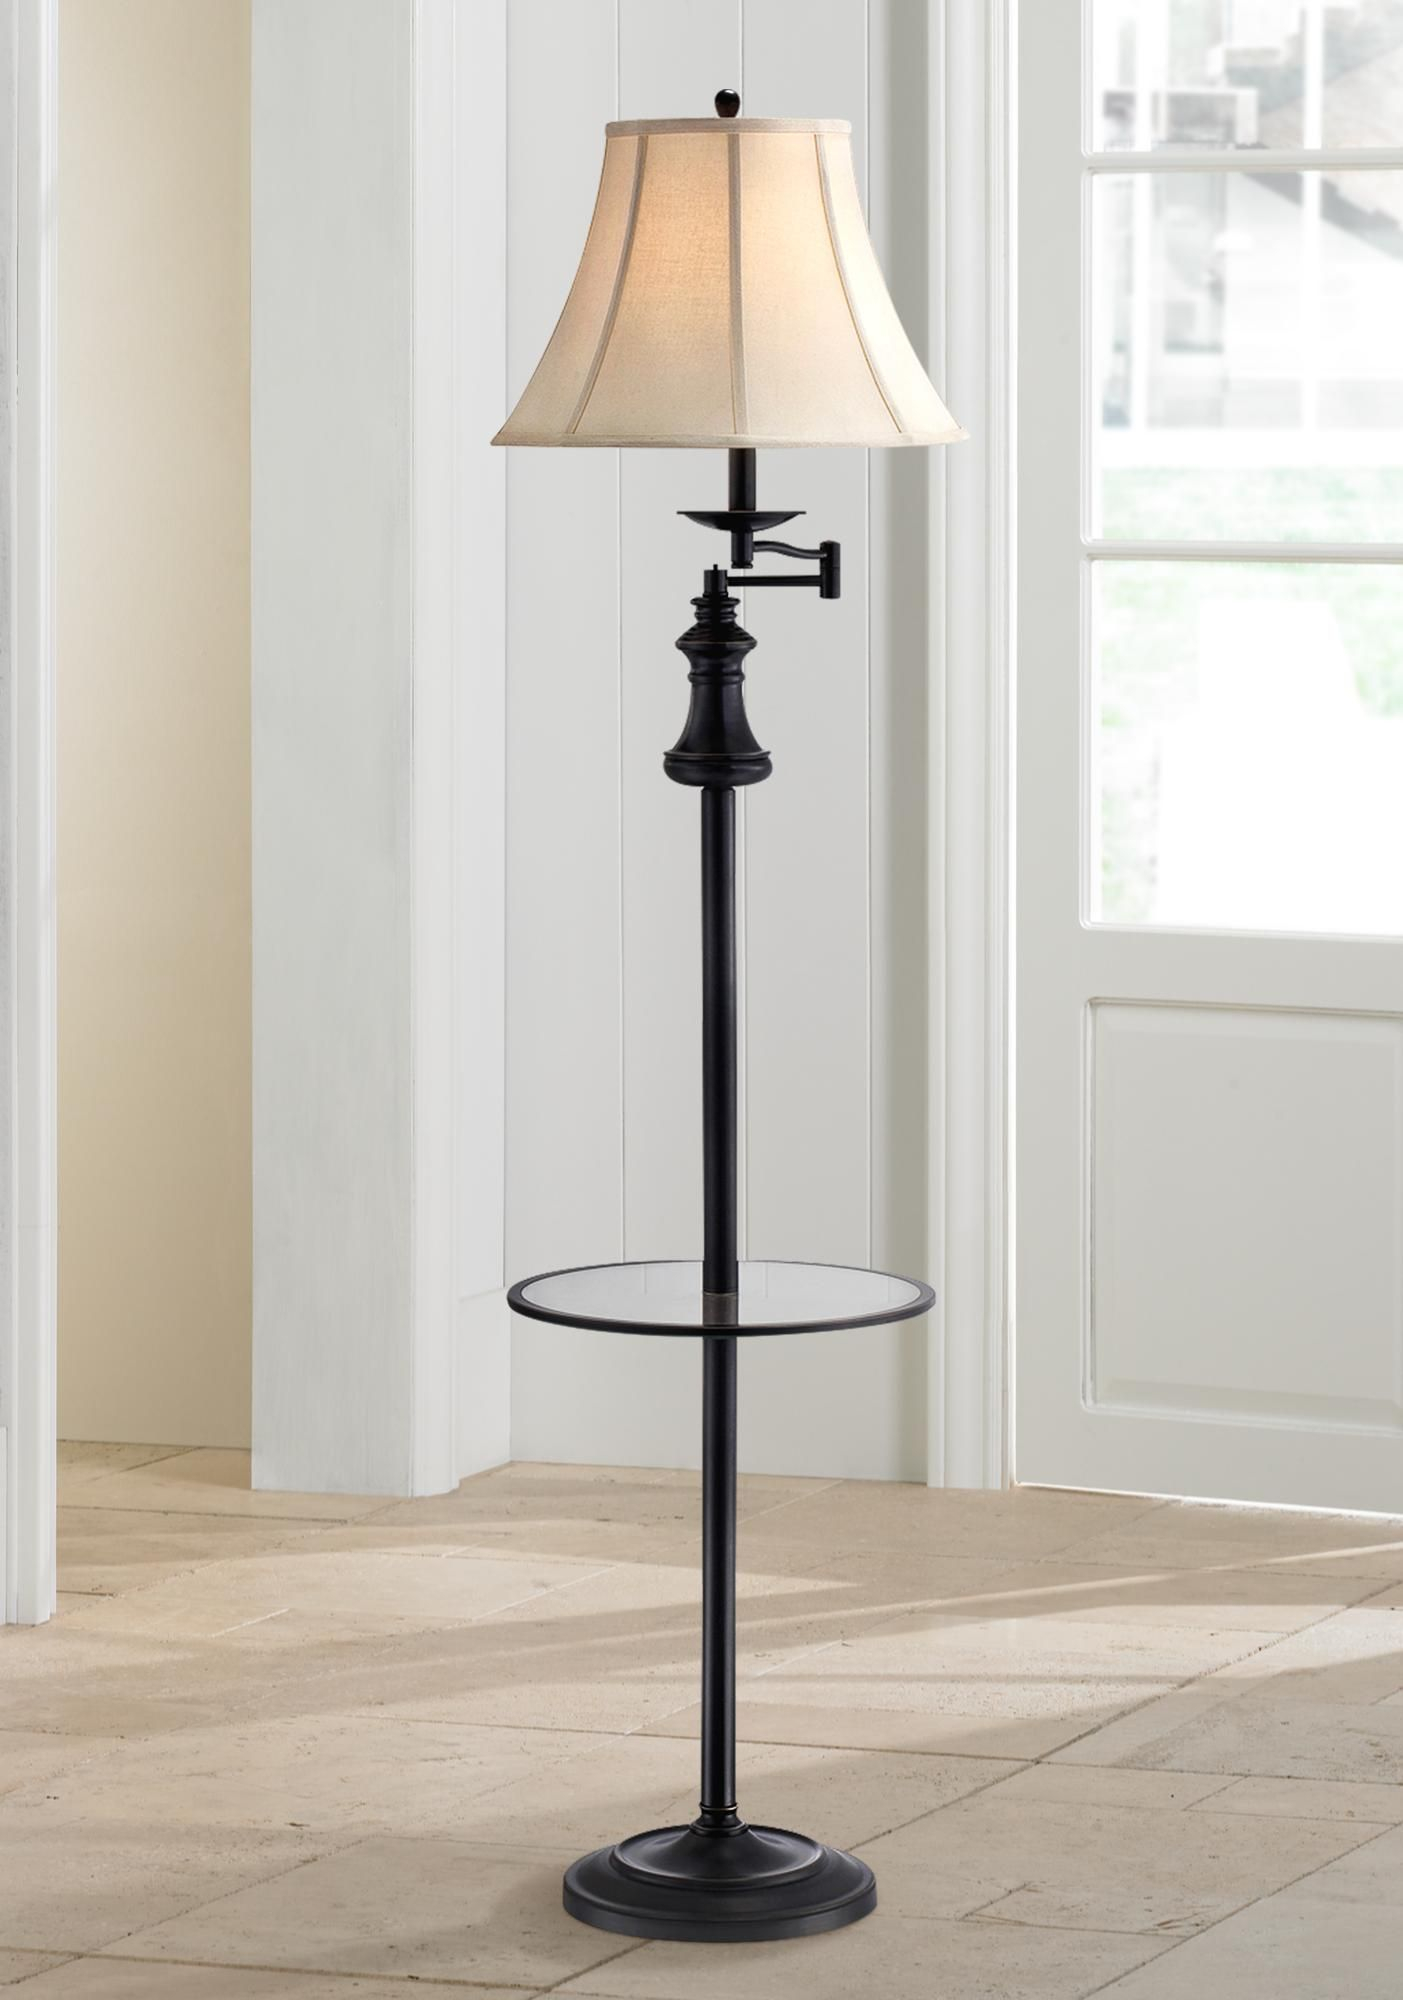 Lite Source Brandice Swing Arm Floor Lamp With Table Tray with regard to size 1403 X 2000